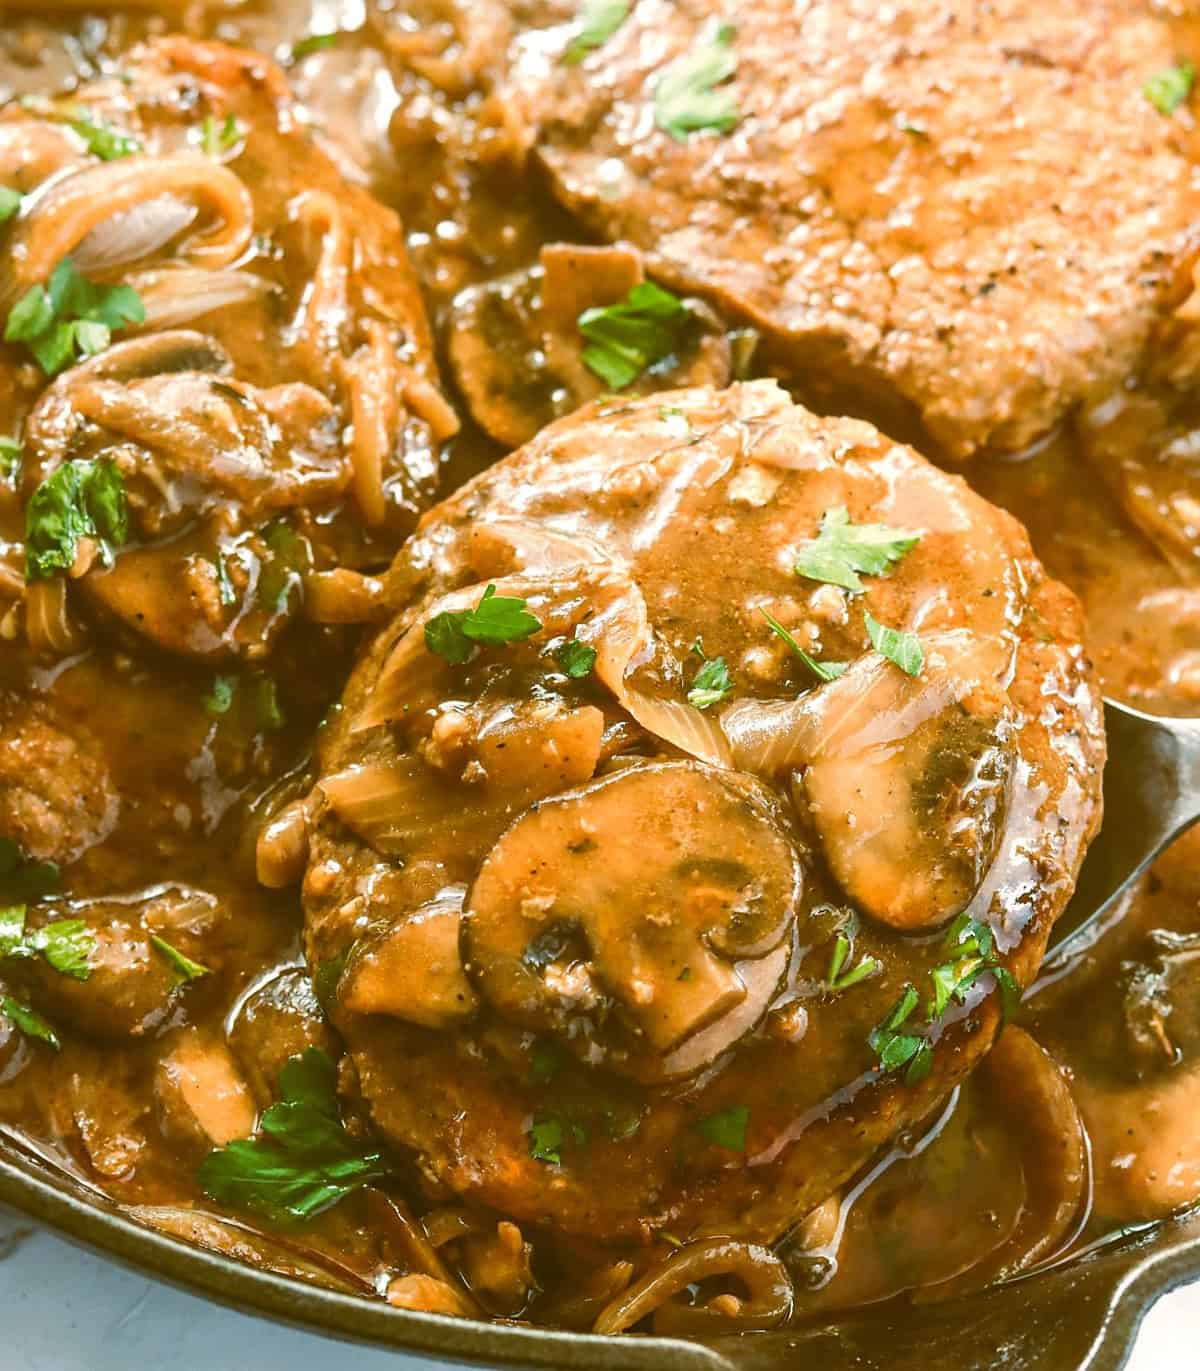 Smothered steak for authentic Southern comfort food